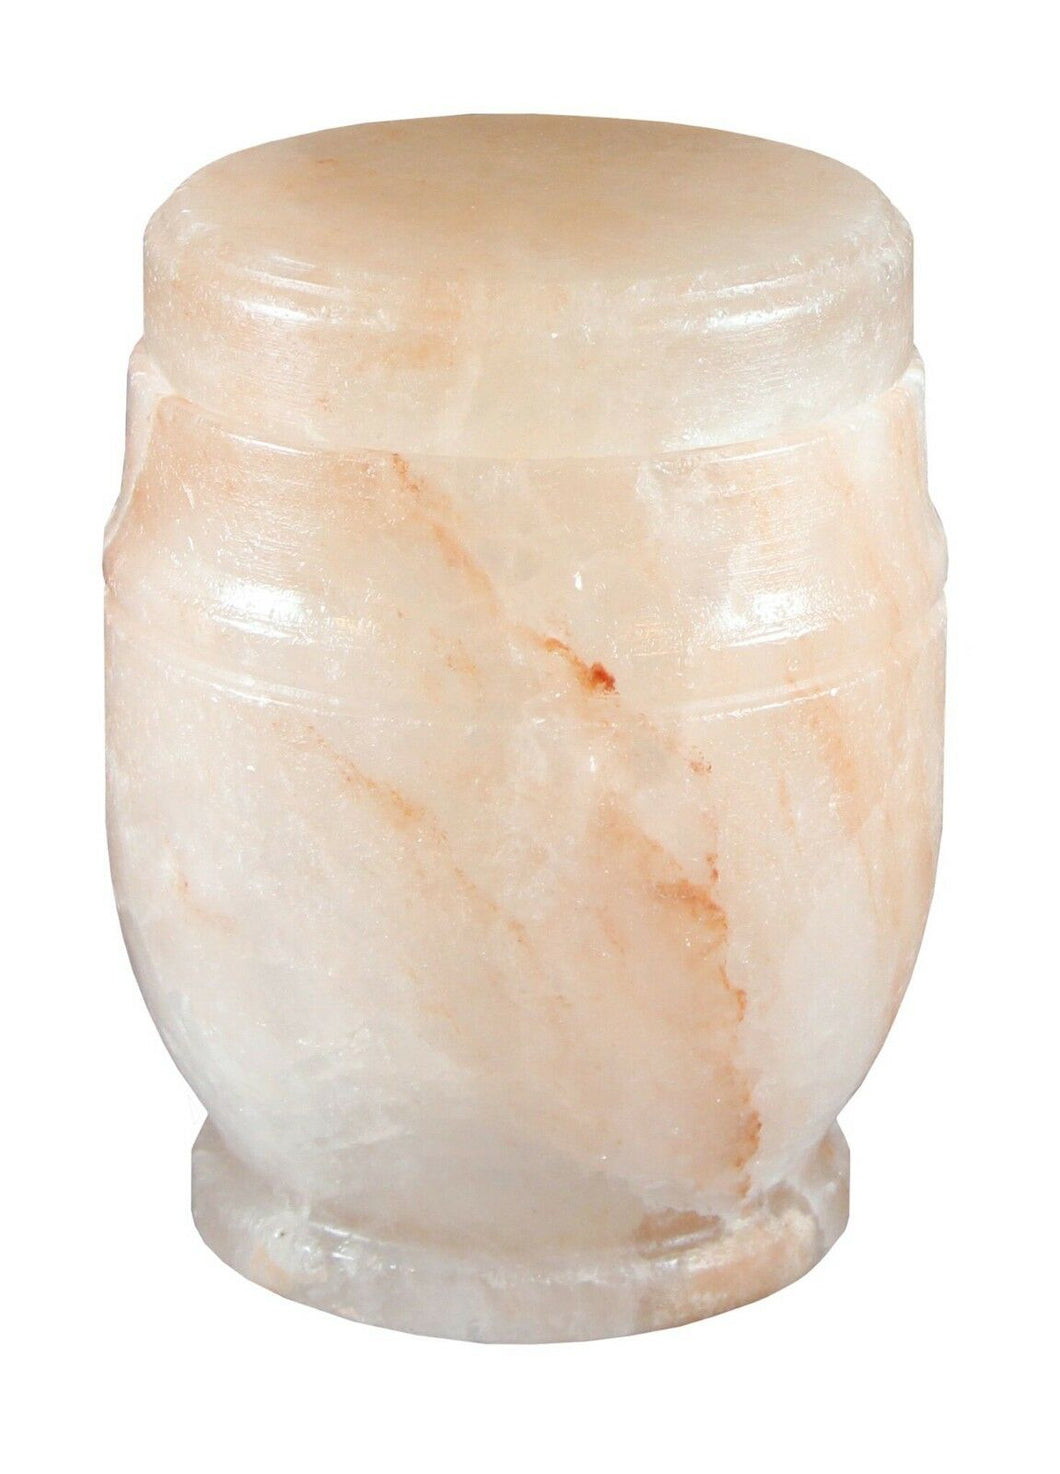 Biodegradable, Eco-Friendly Salt Adult Funeral Cremation Urn, 220 Cubic Inches